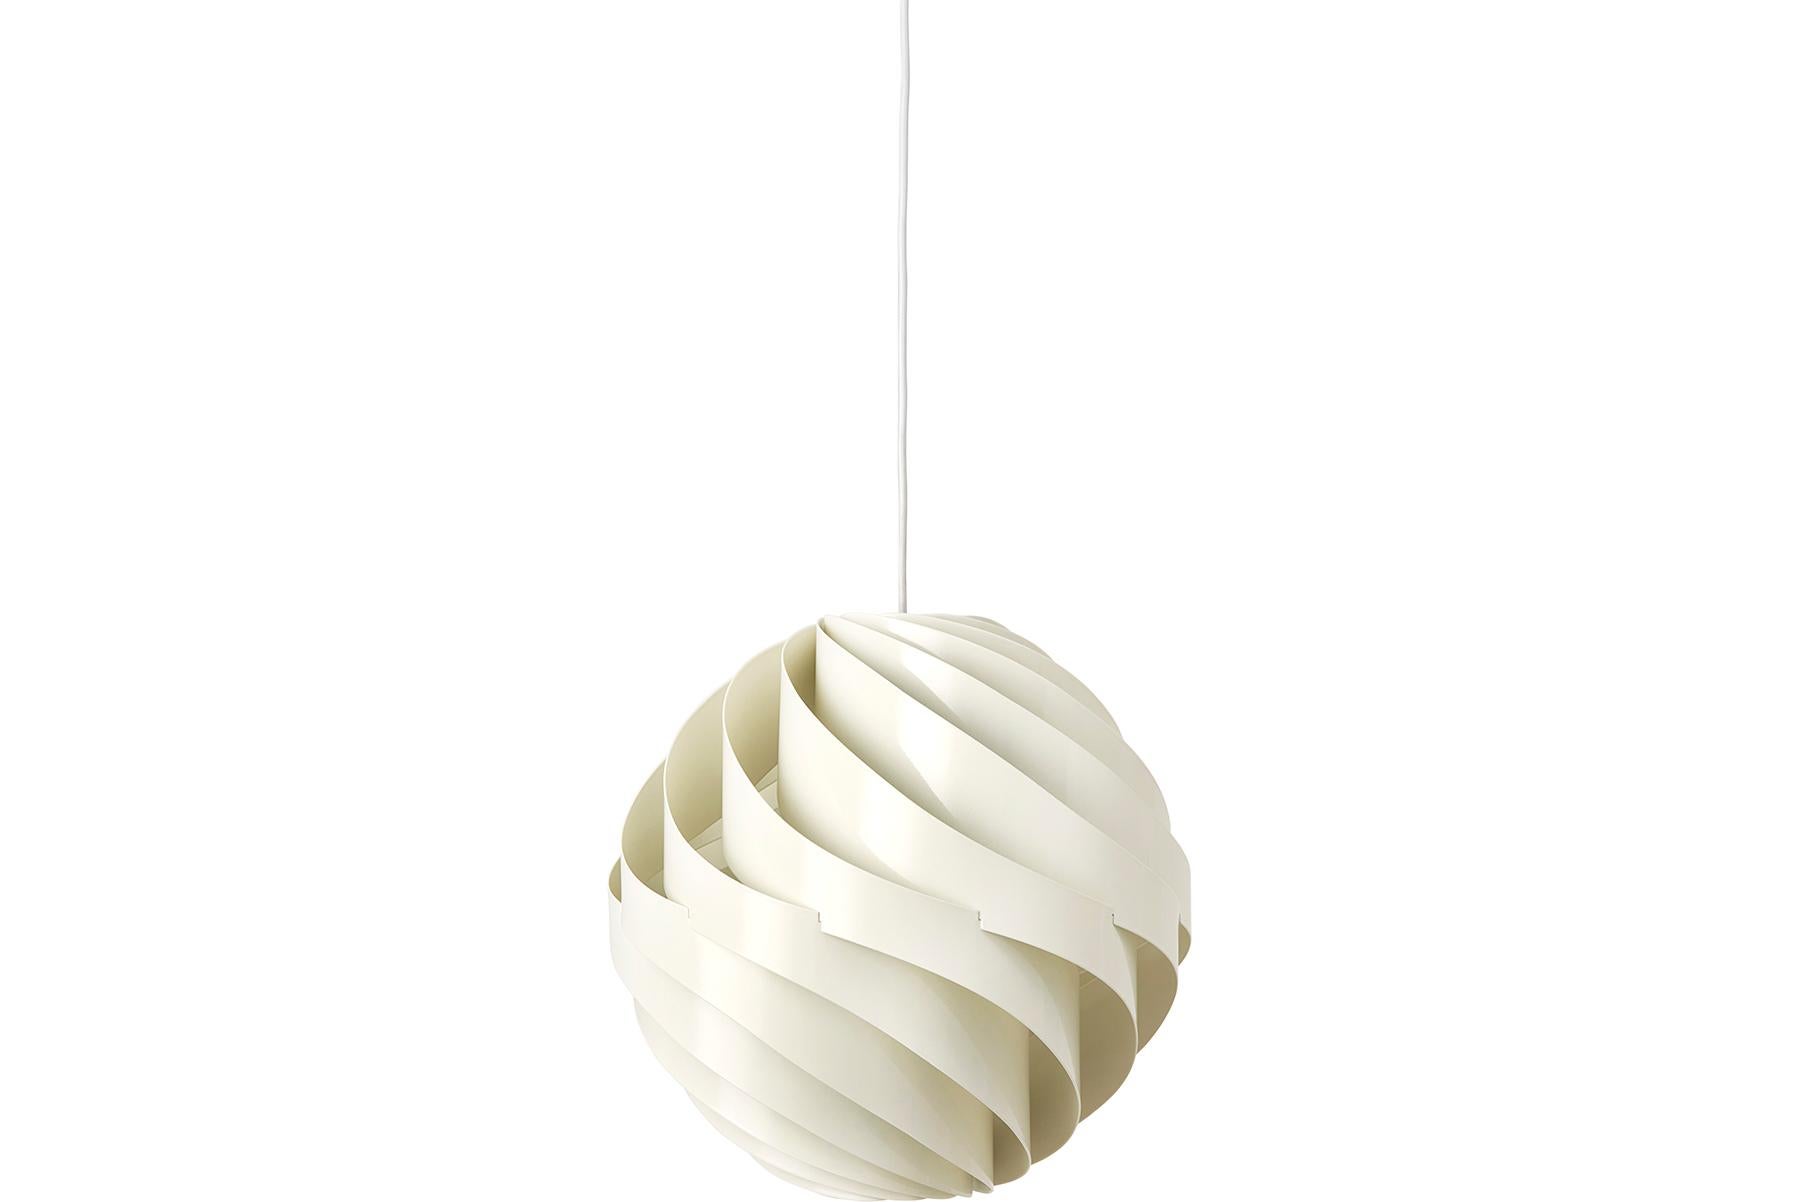 Louis Weisdorf's turbo pendant was designed in 1965, but first put into production in 1967 and has achieved great success over the years.

It illustrates design at its best: it is simple in form, yet complex in structure and combines a sense of